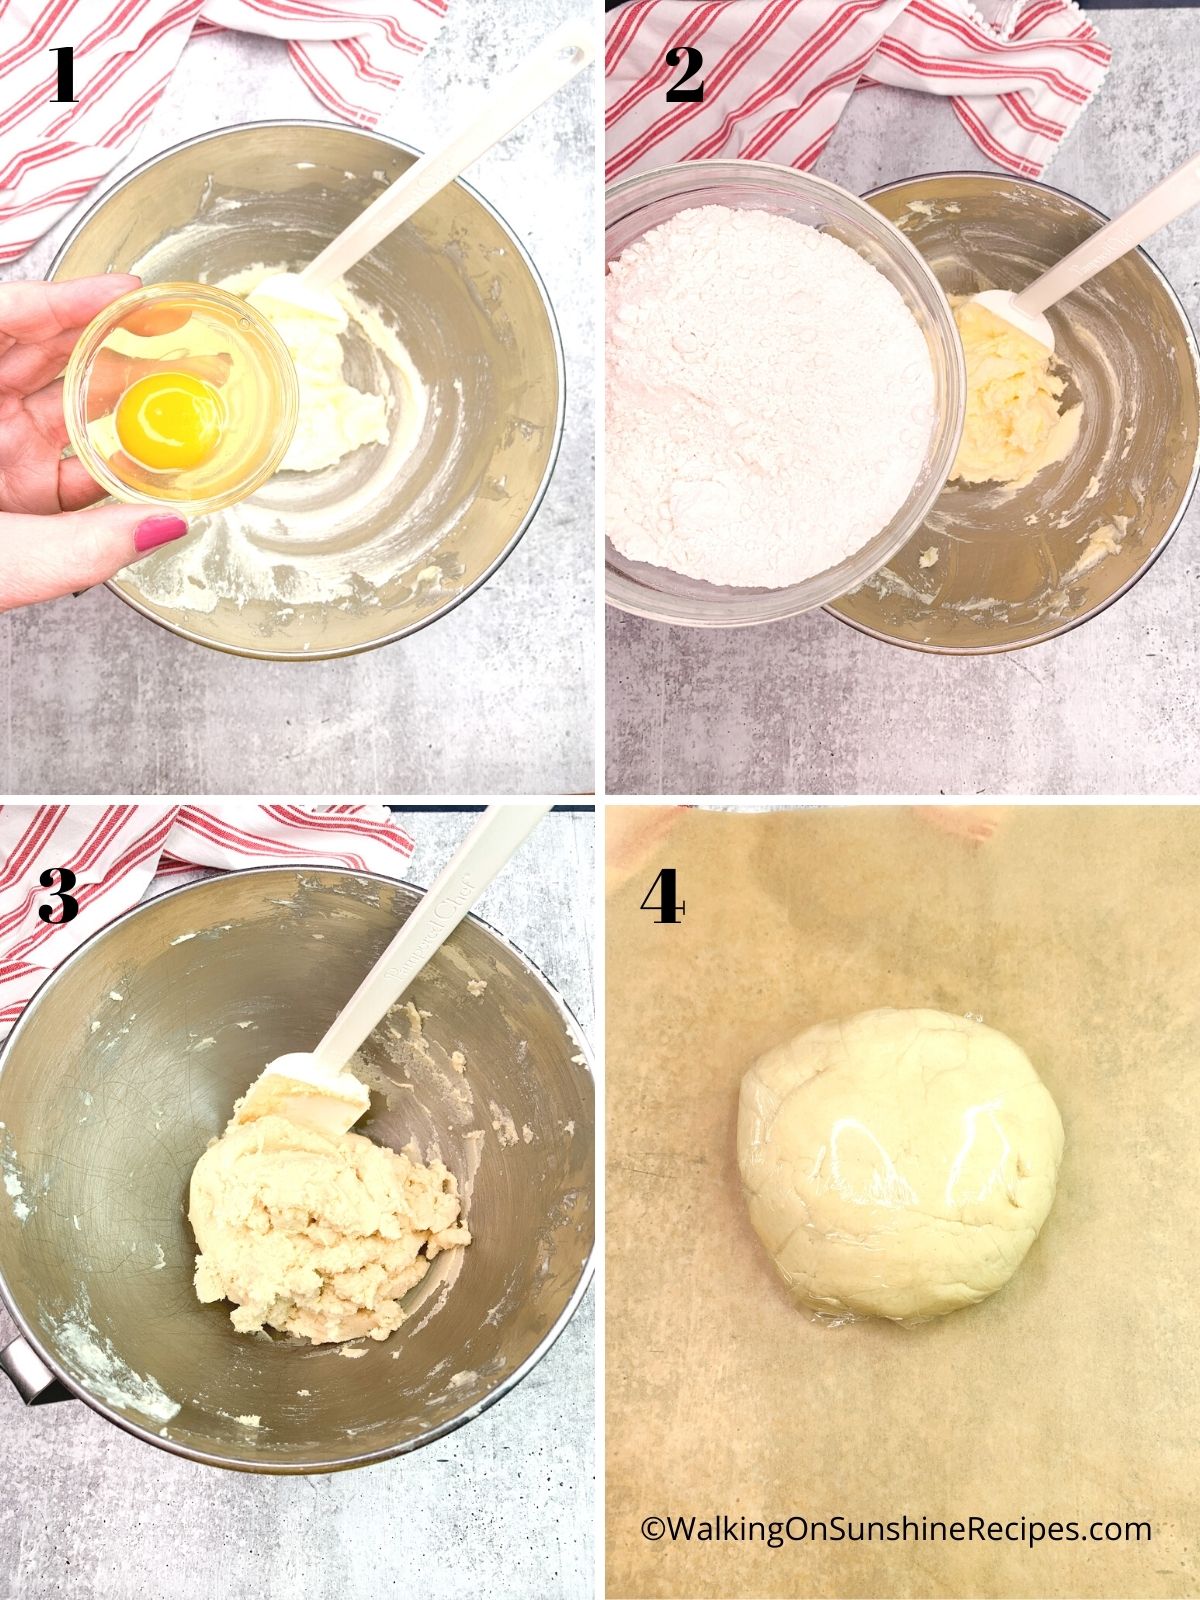 Combine ingredients to make dough.